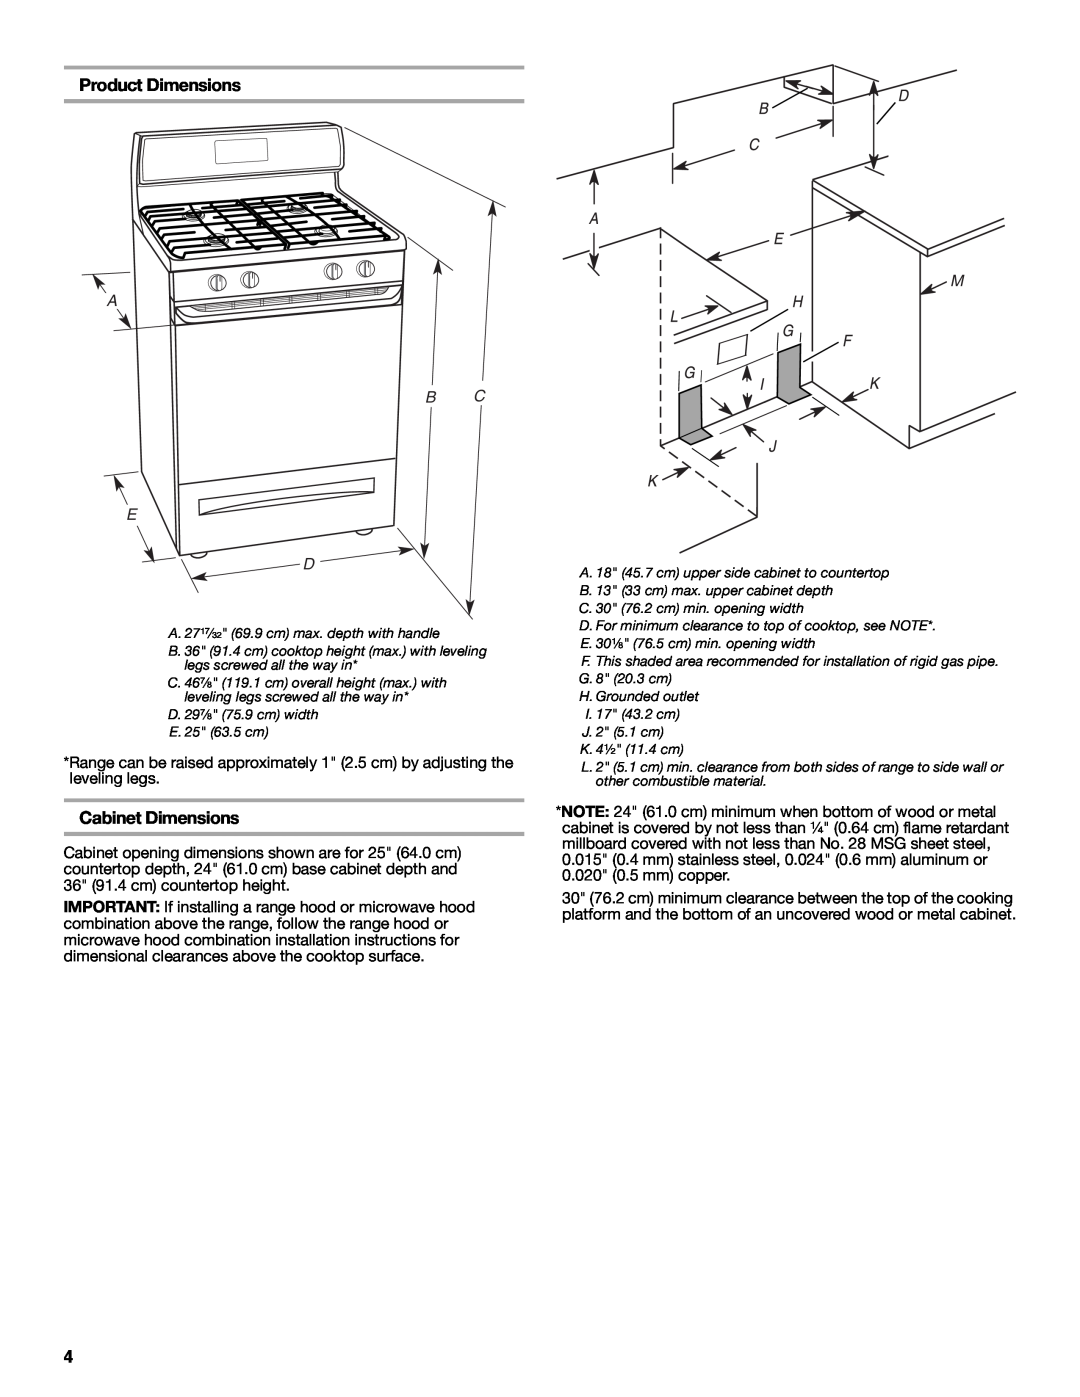 Whirlpool W10196160D installation instructions Product Dimensions, Cabinet Dimensions, A Bc E D 